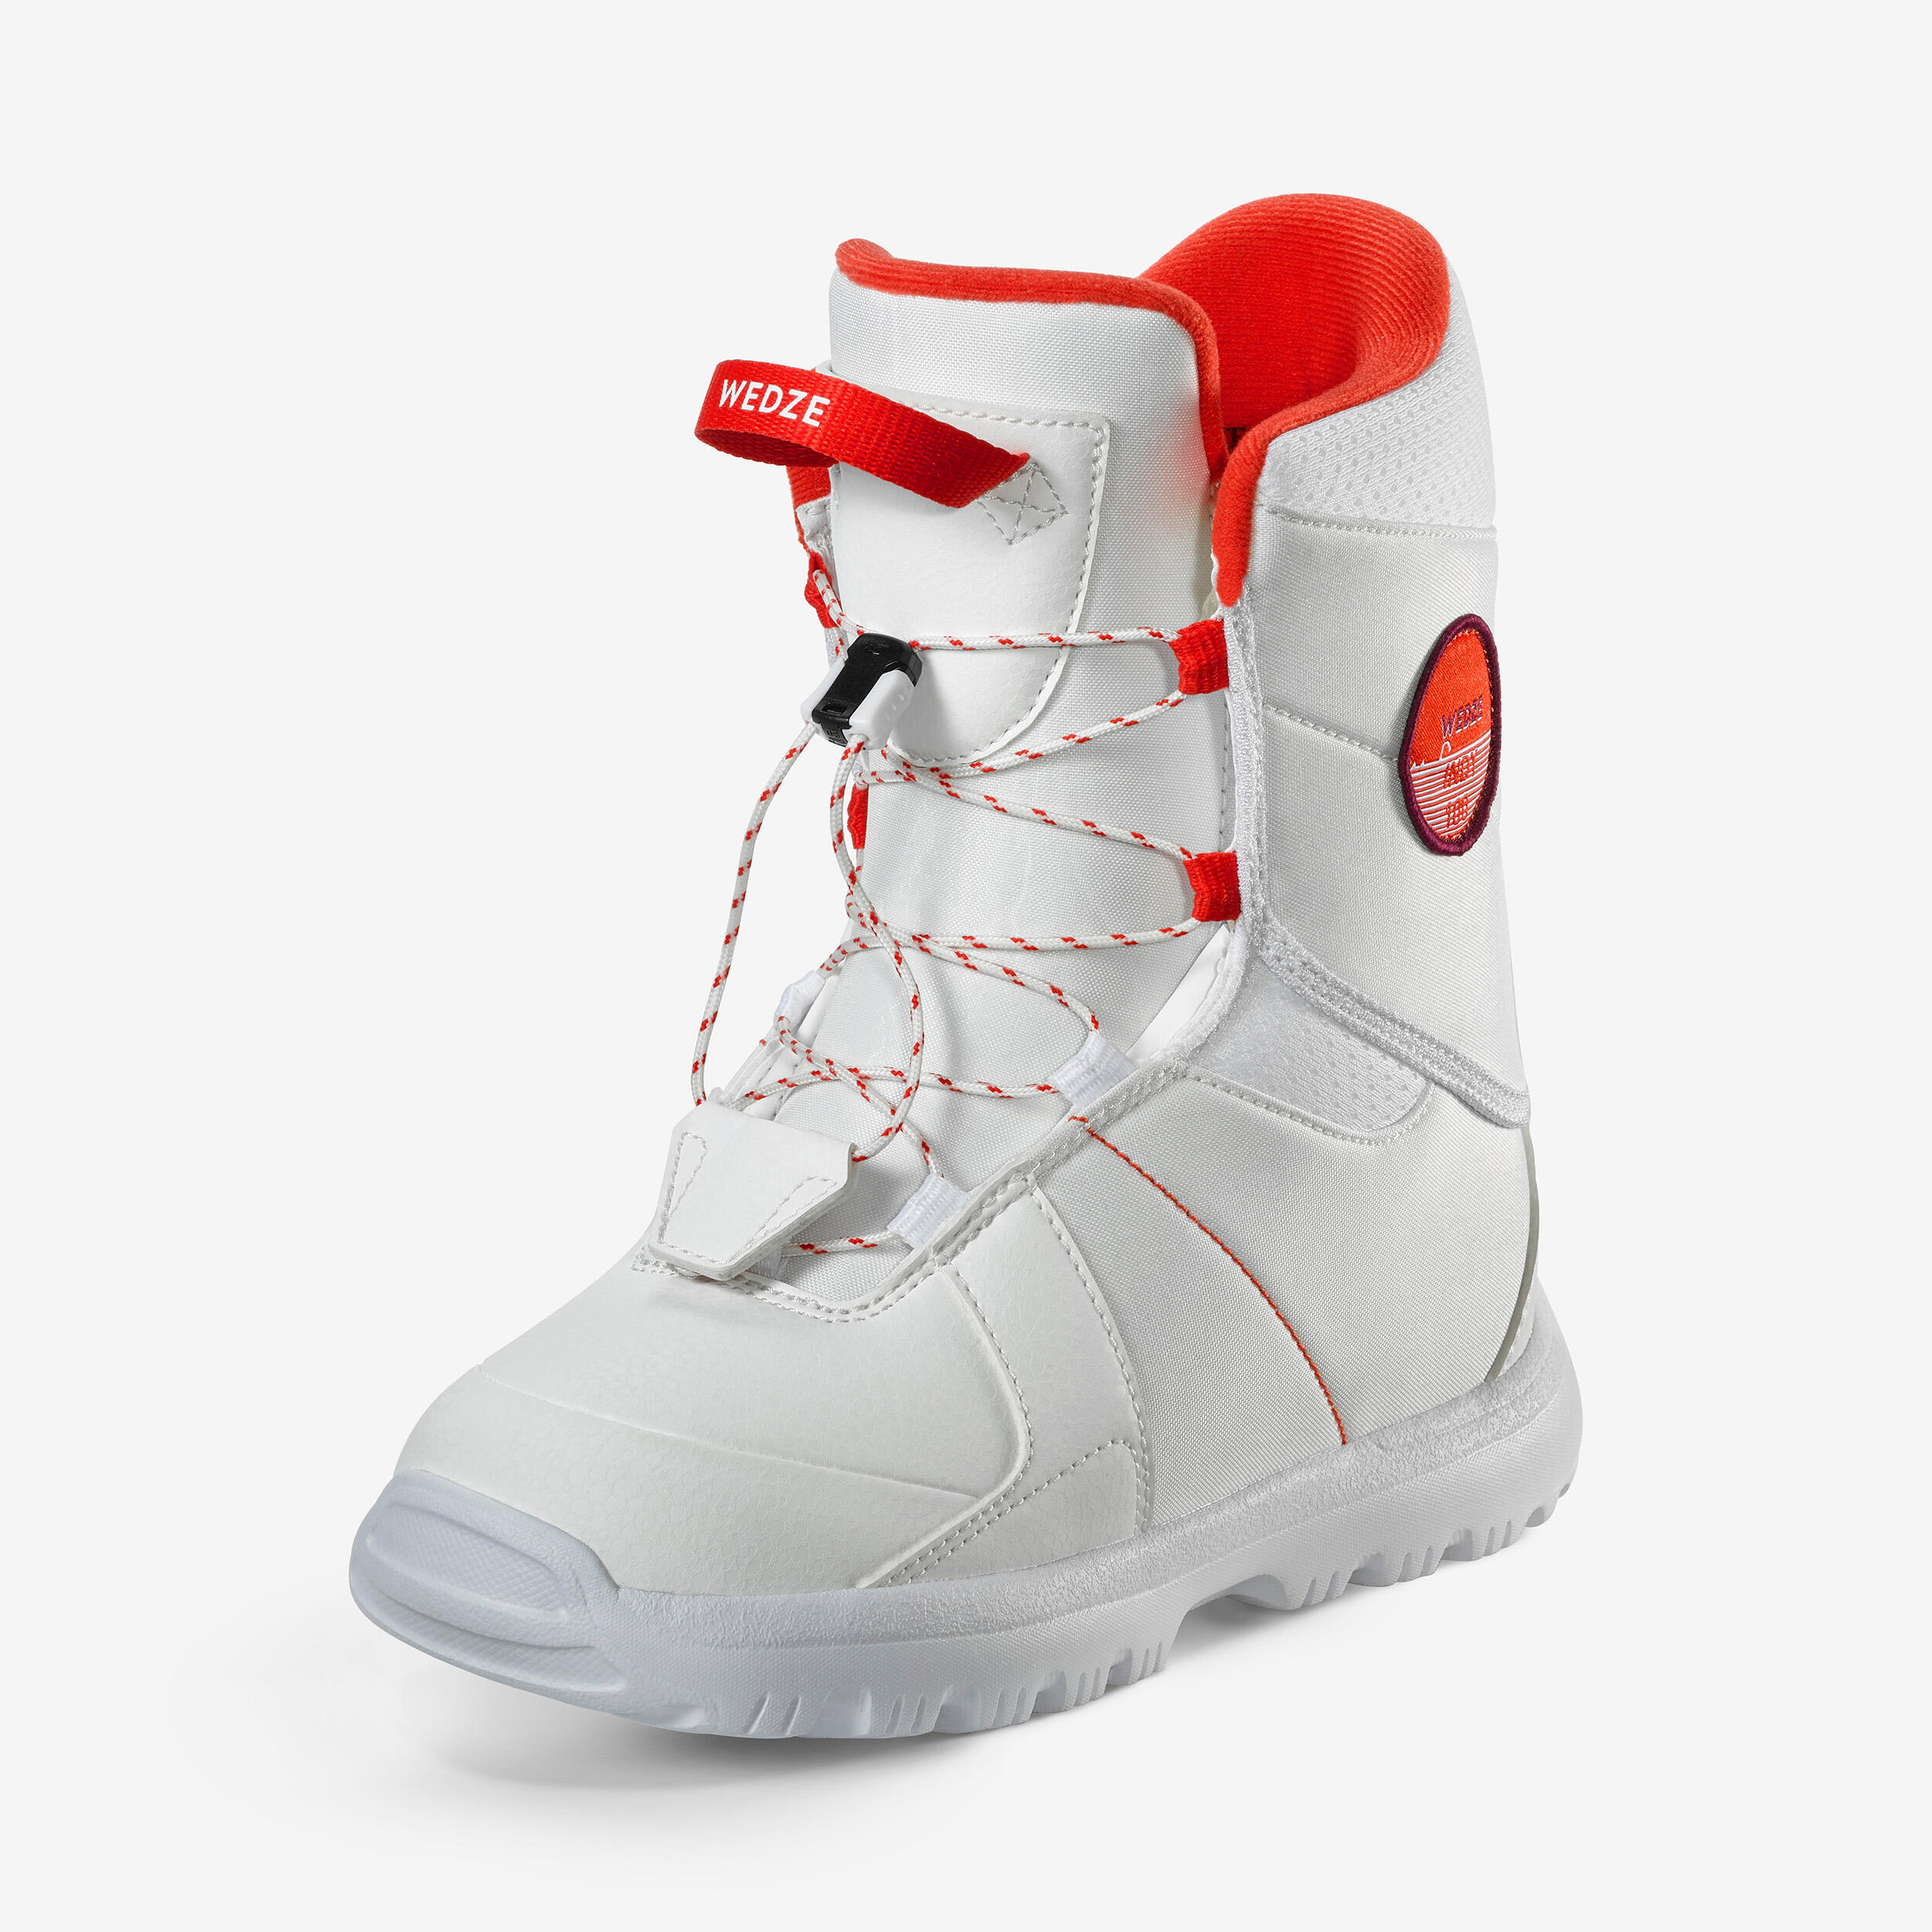 Kids’ Snowboarding Boots - Indy 100